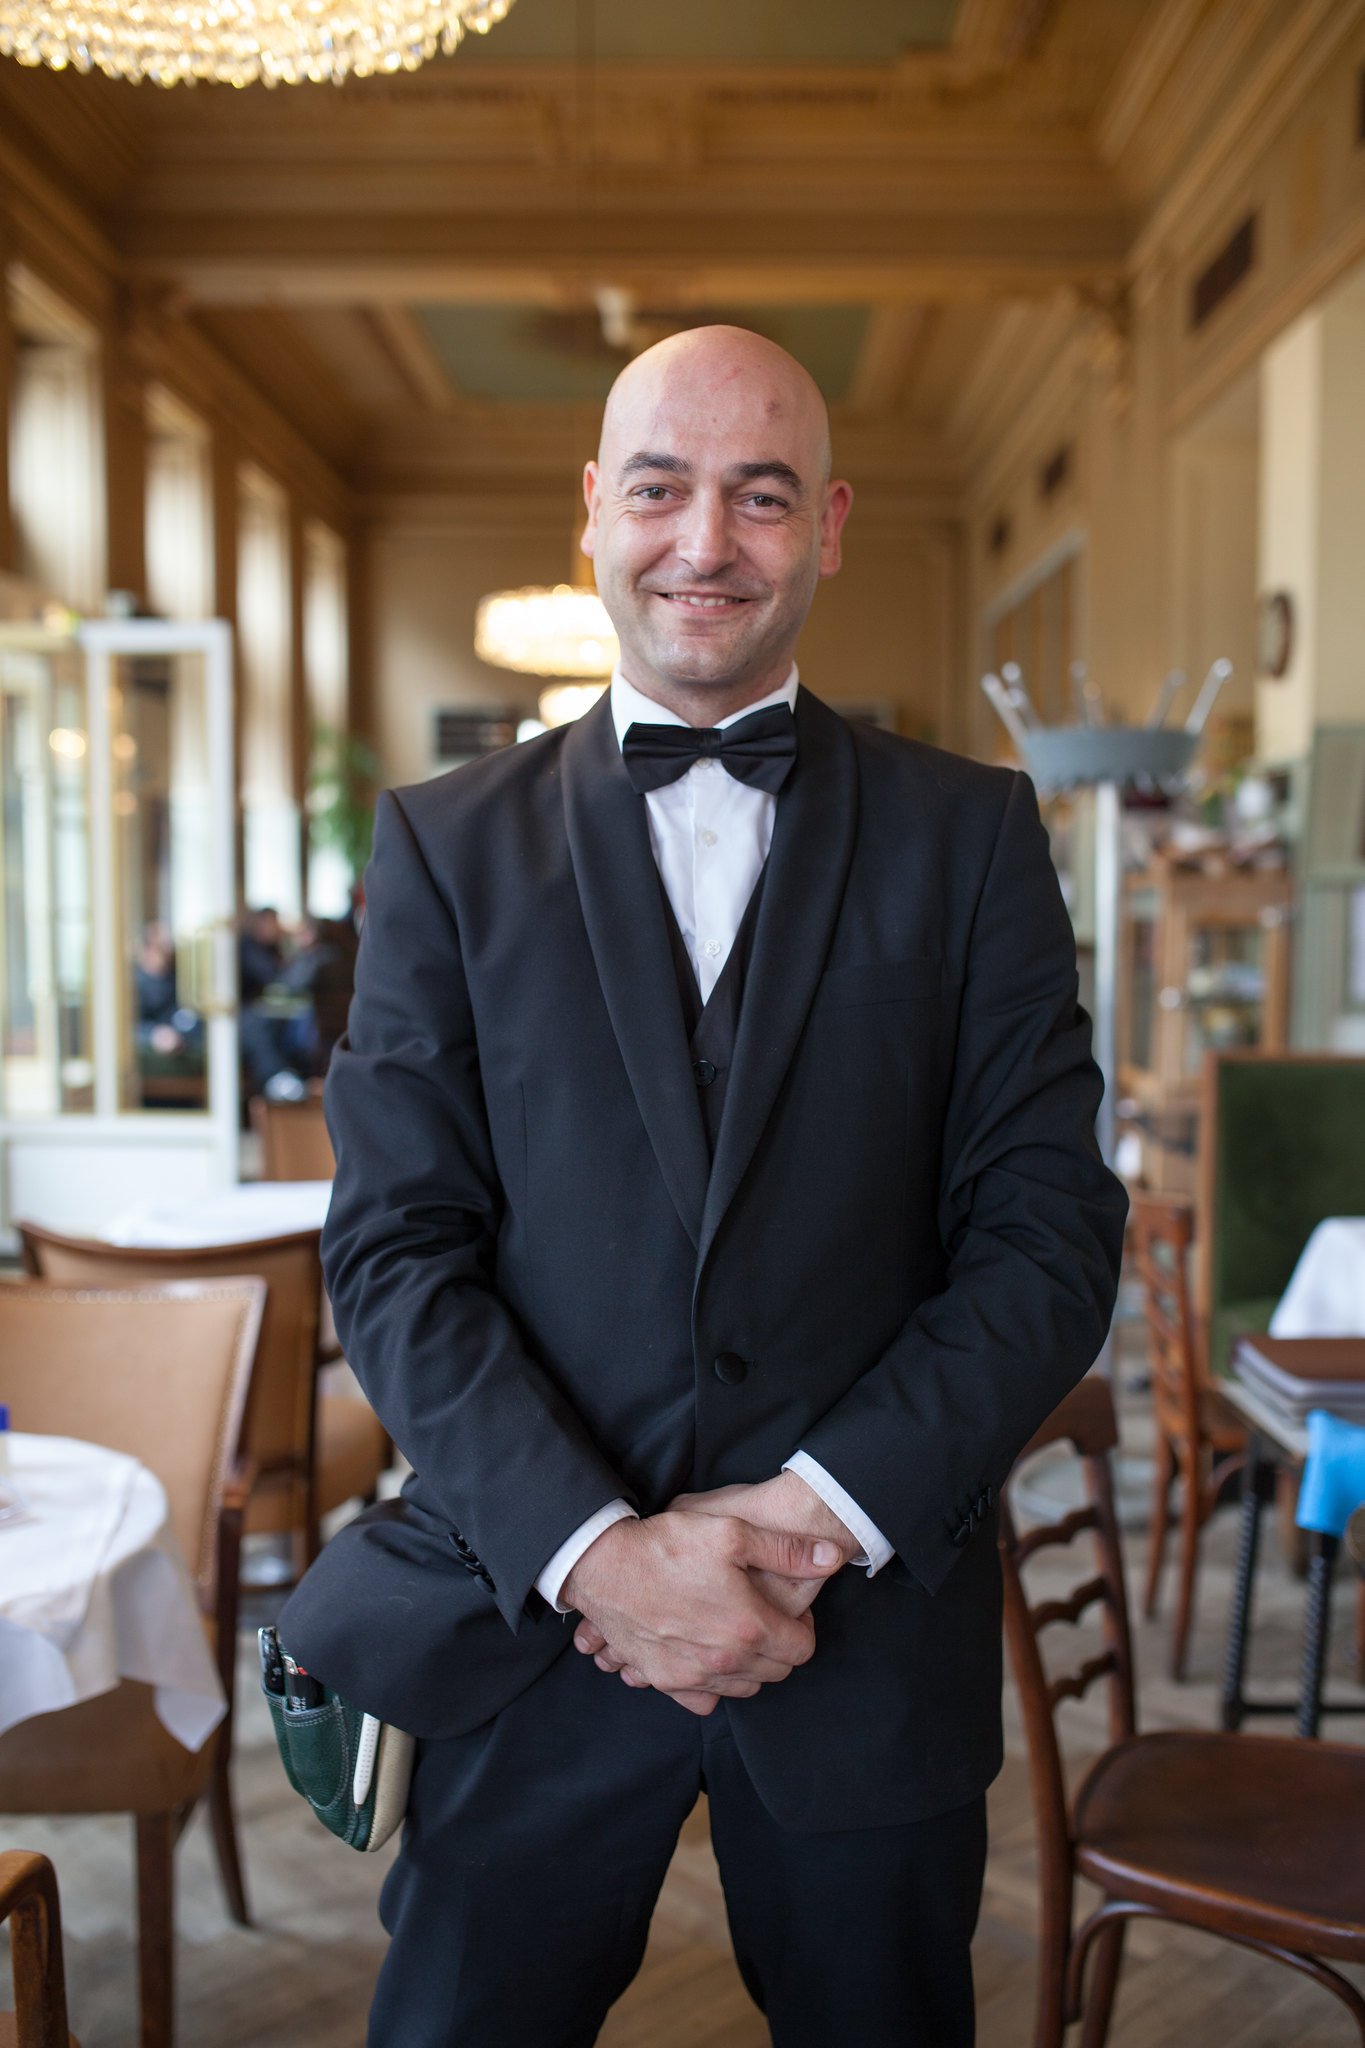 A waiter in a suit. | Source: Flickr/Michael David